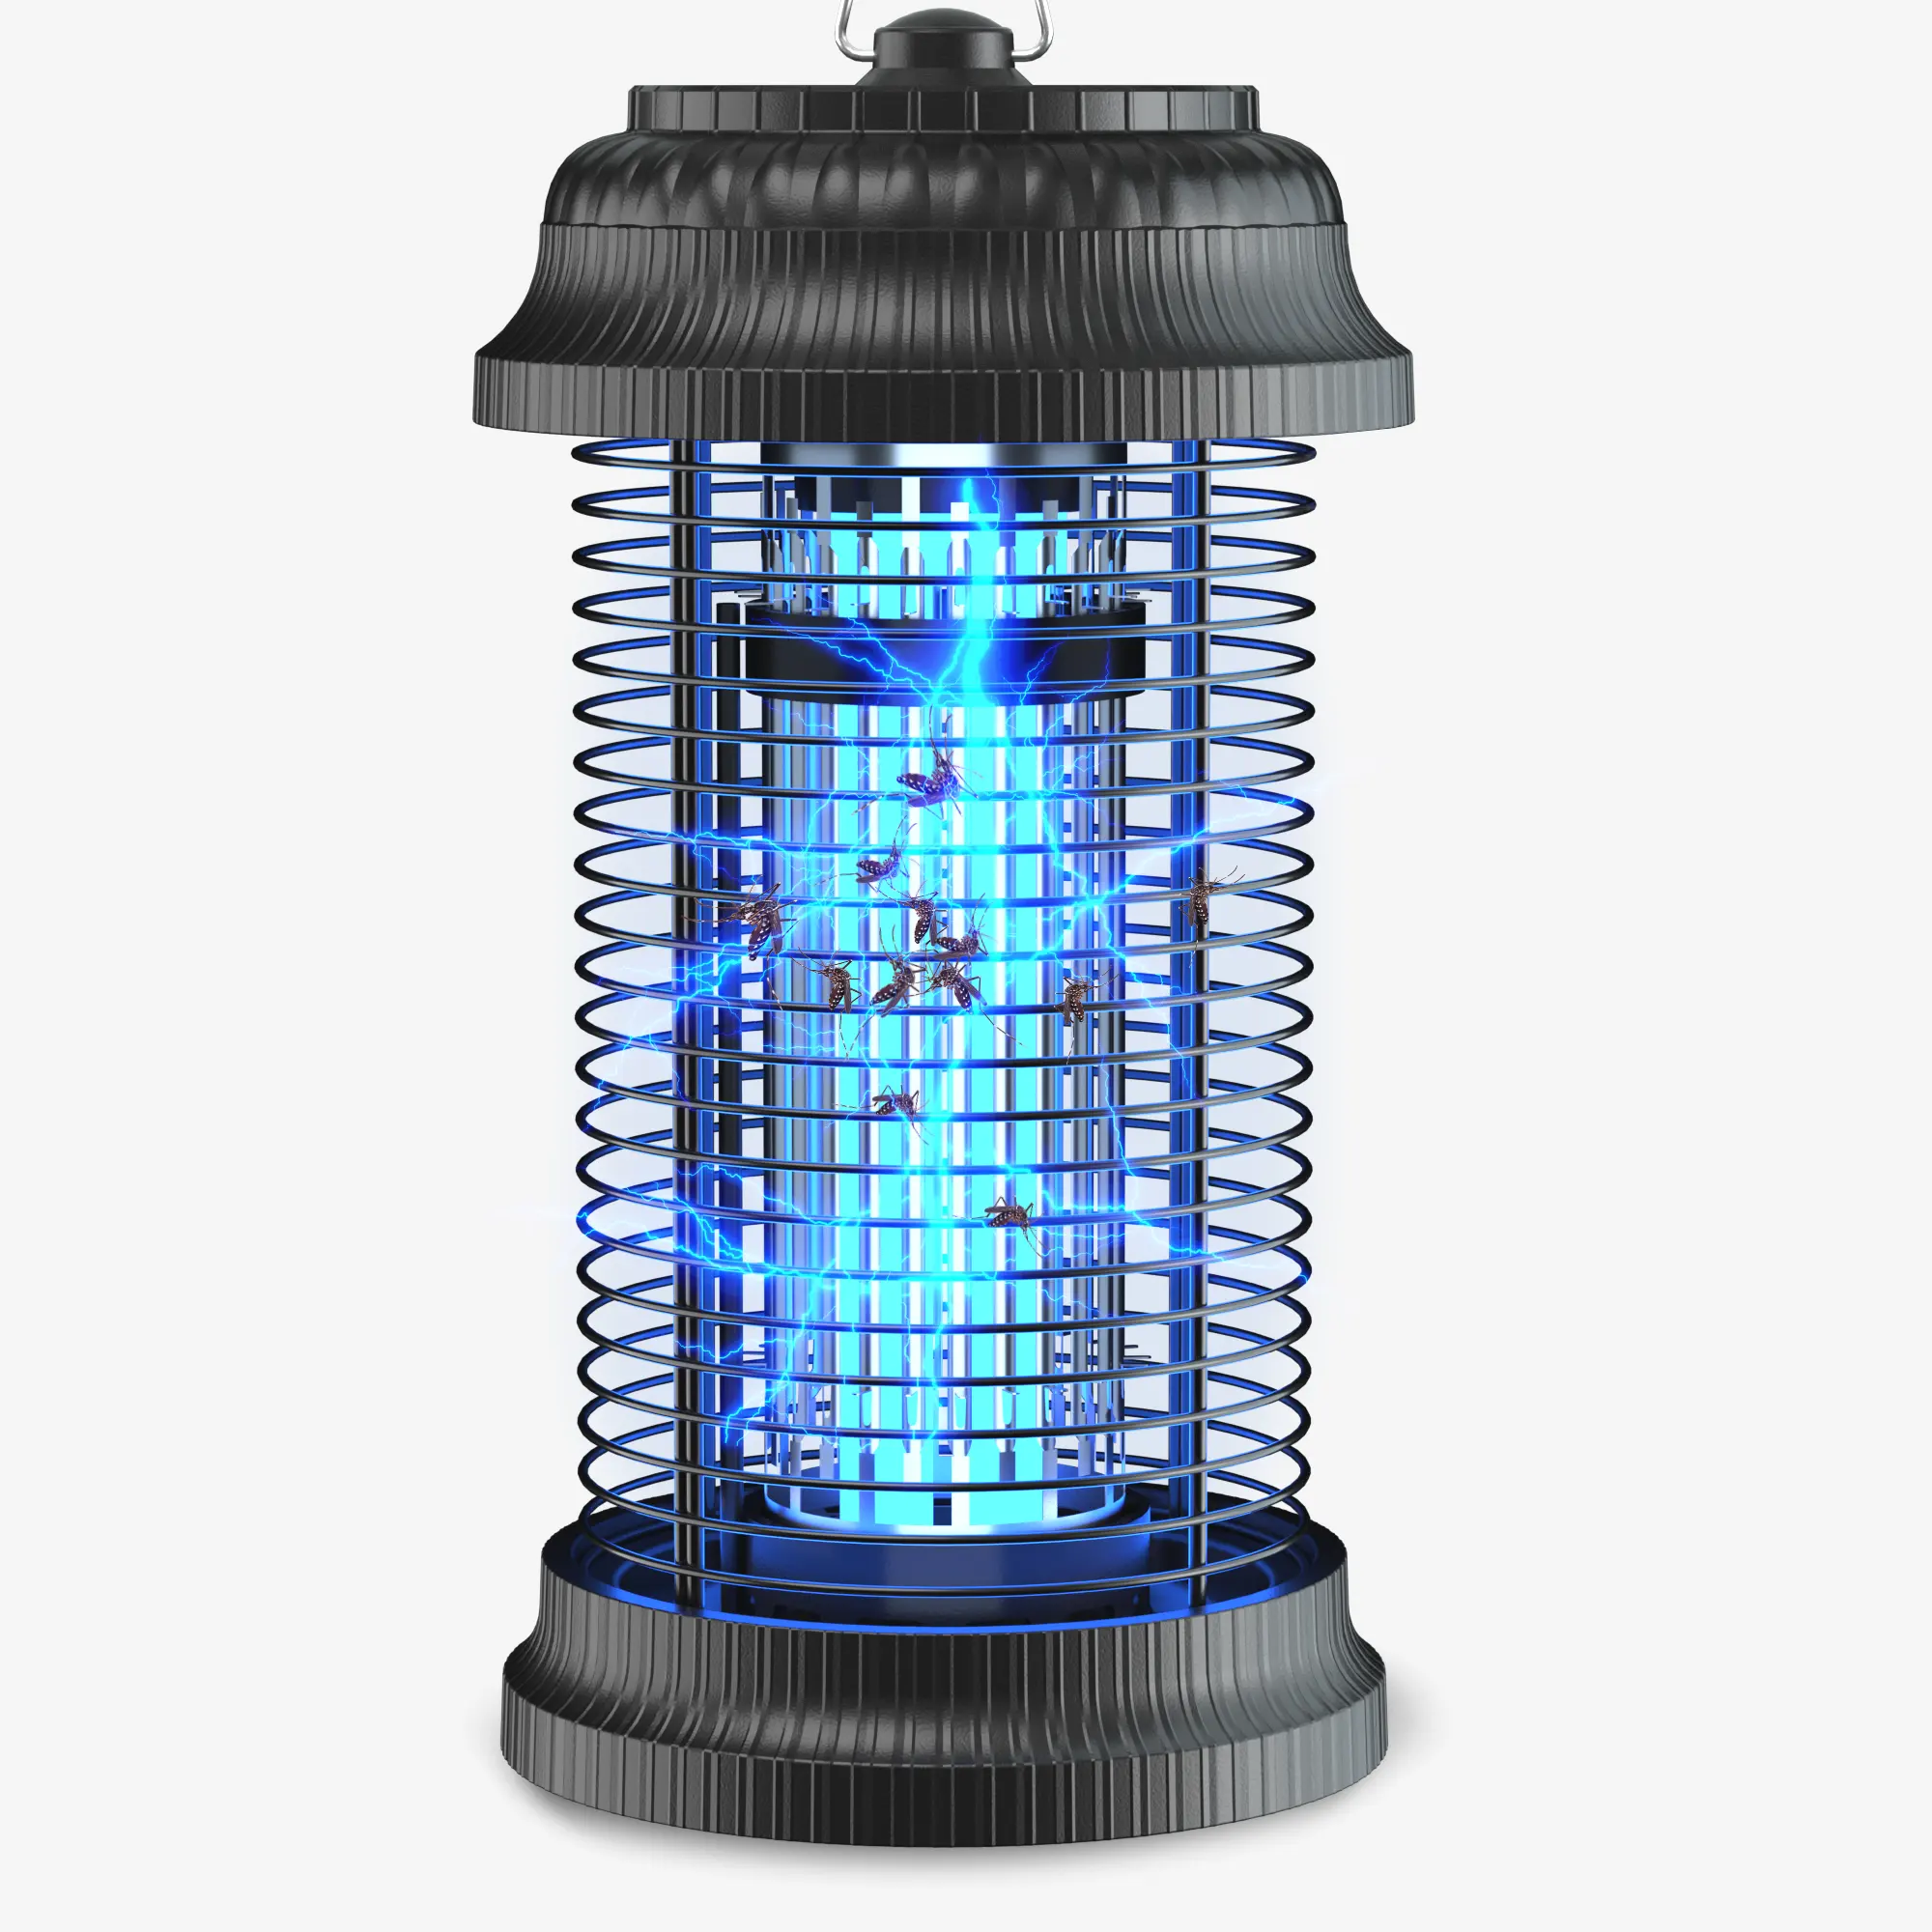 Mosquito killer lamp outdoor best sellers 2020/2021 for pest control Bug Zapper